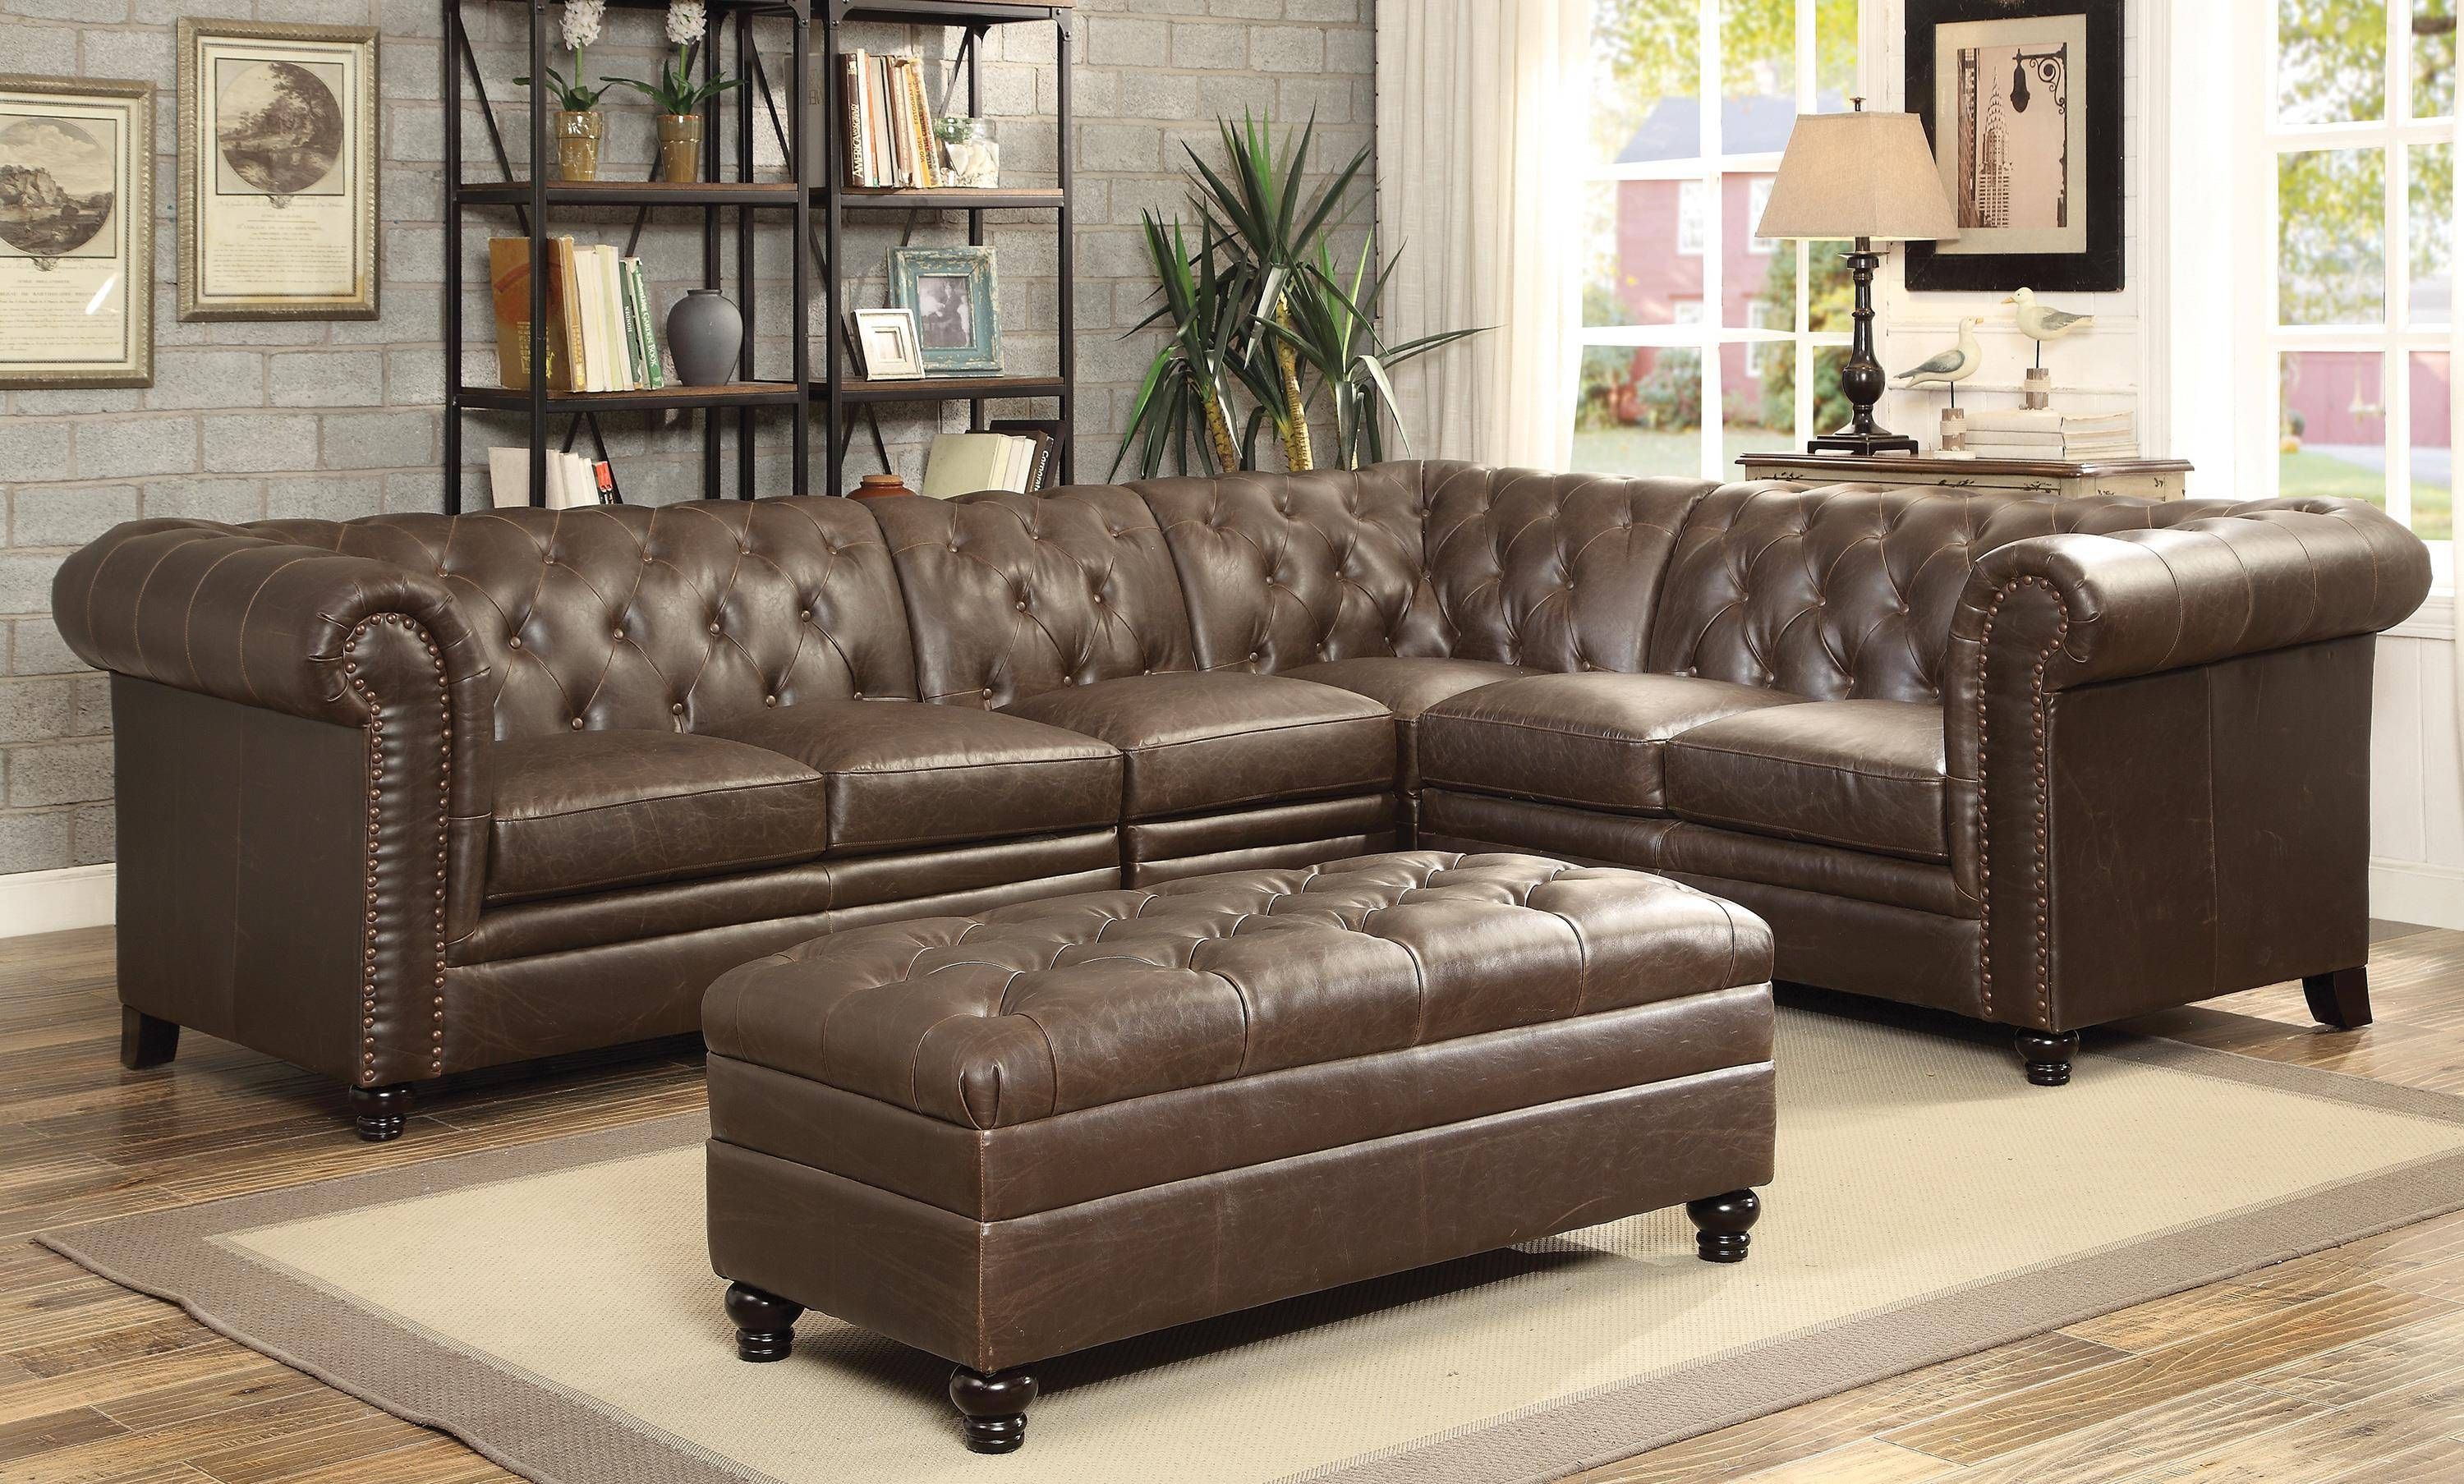 Sofa: Comfort And Style Is Evident In This Dynamic With Tufted Within Tufted Sectional Sofa Chaise (View 4 of 25)